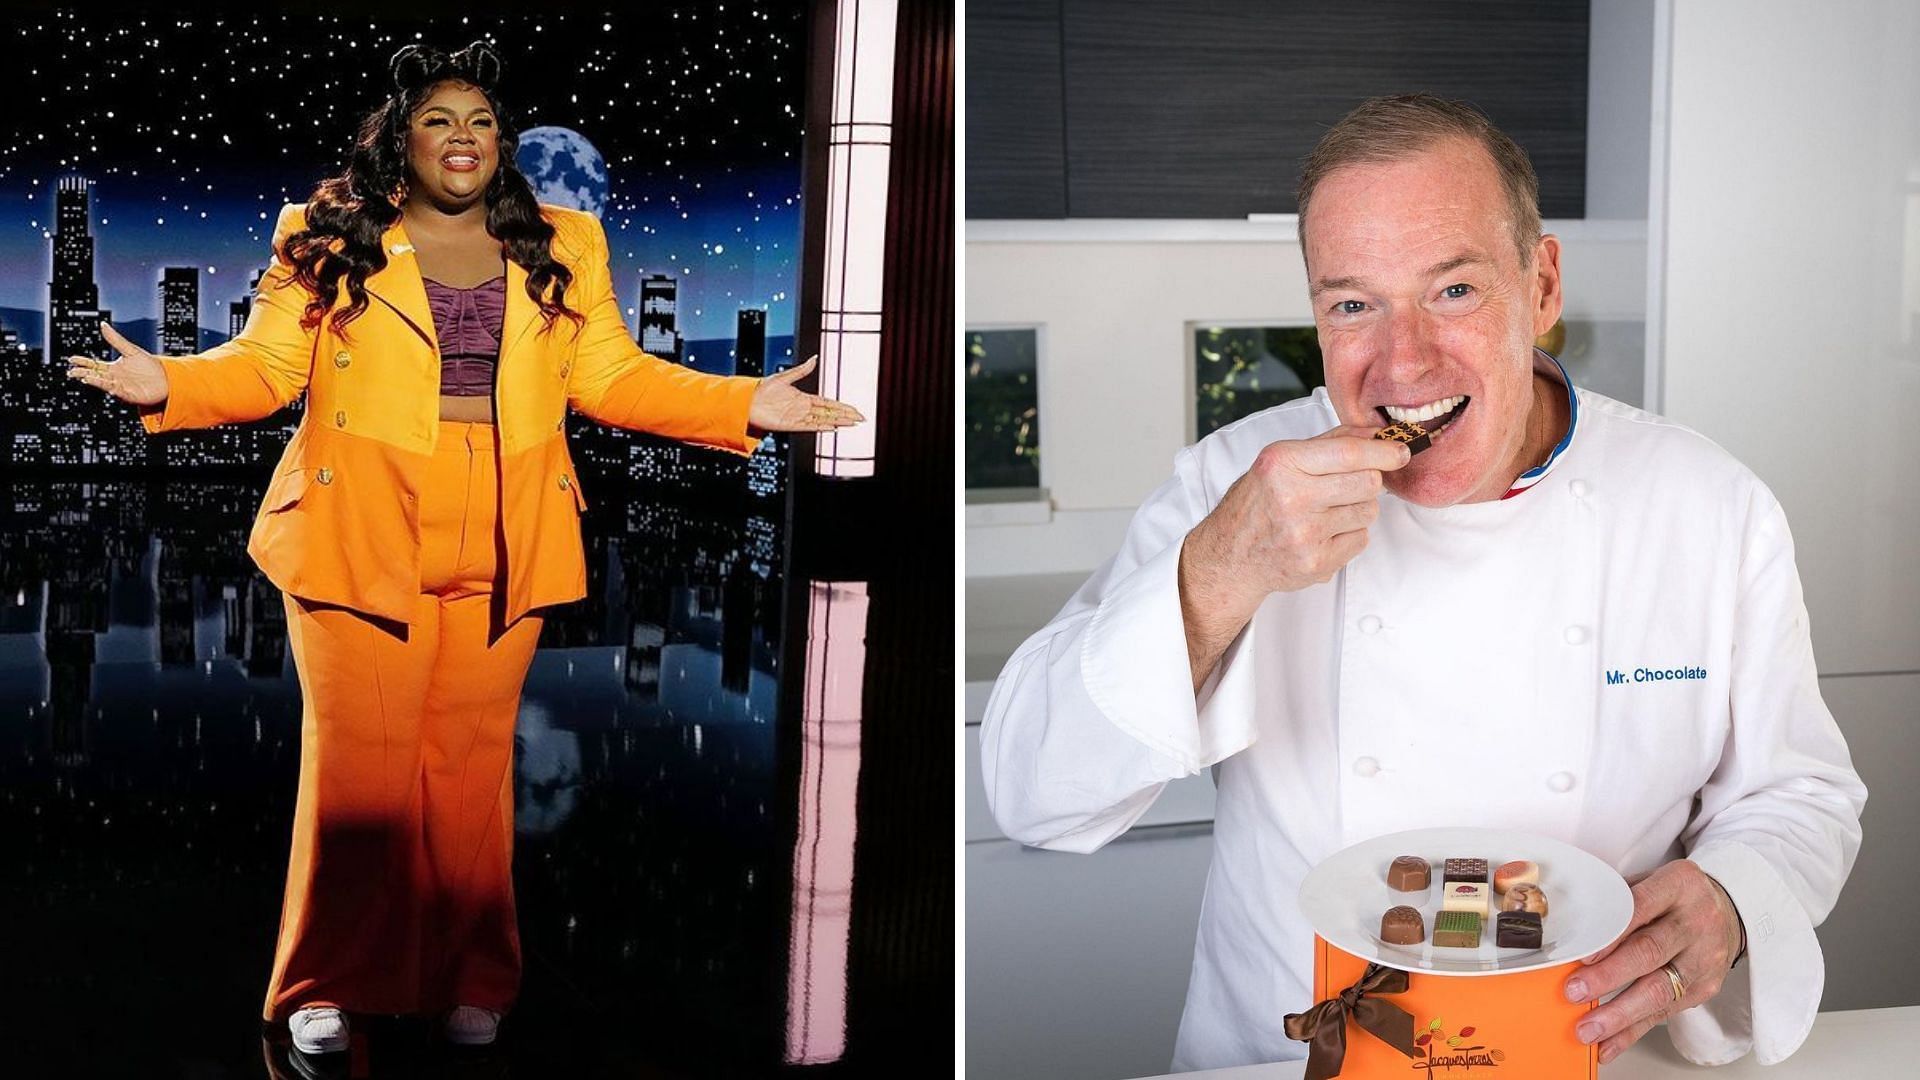 Nailed It! Season 7 is hosted by Nicole Byer and judged by pasty chef Jacques Torres